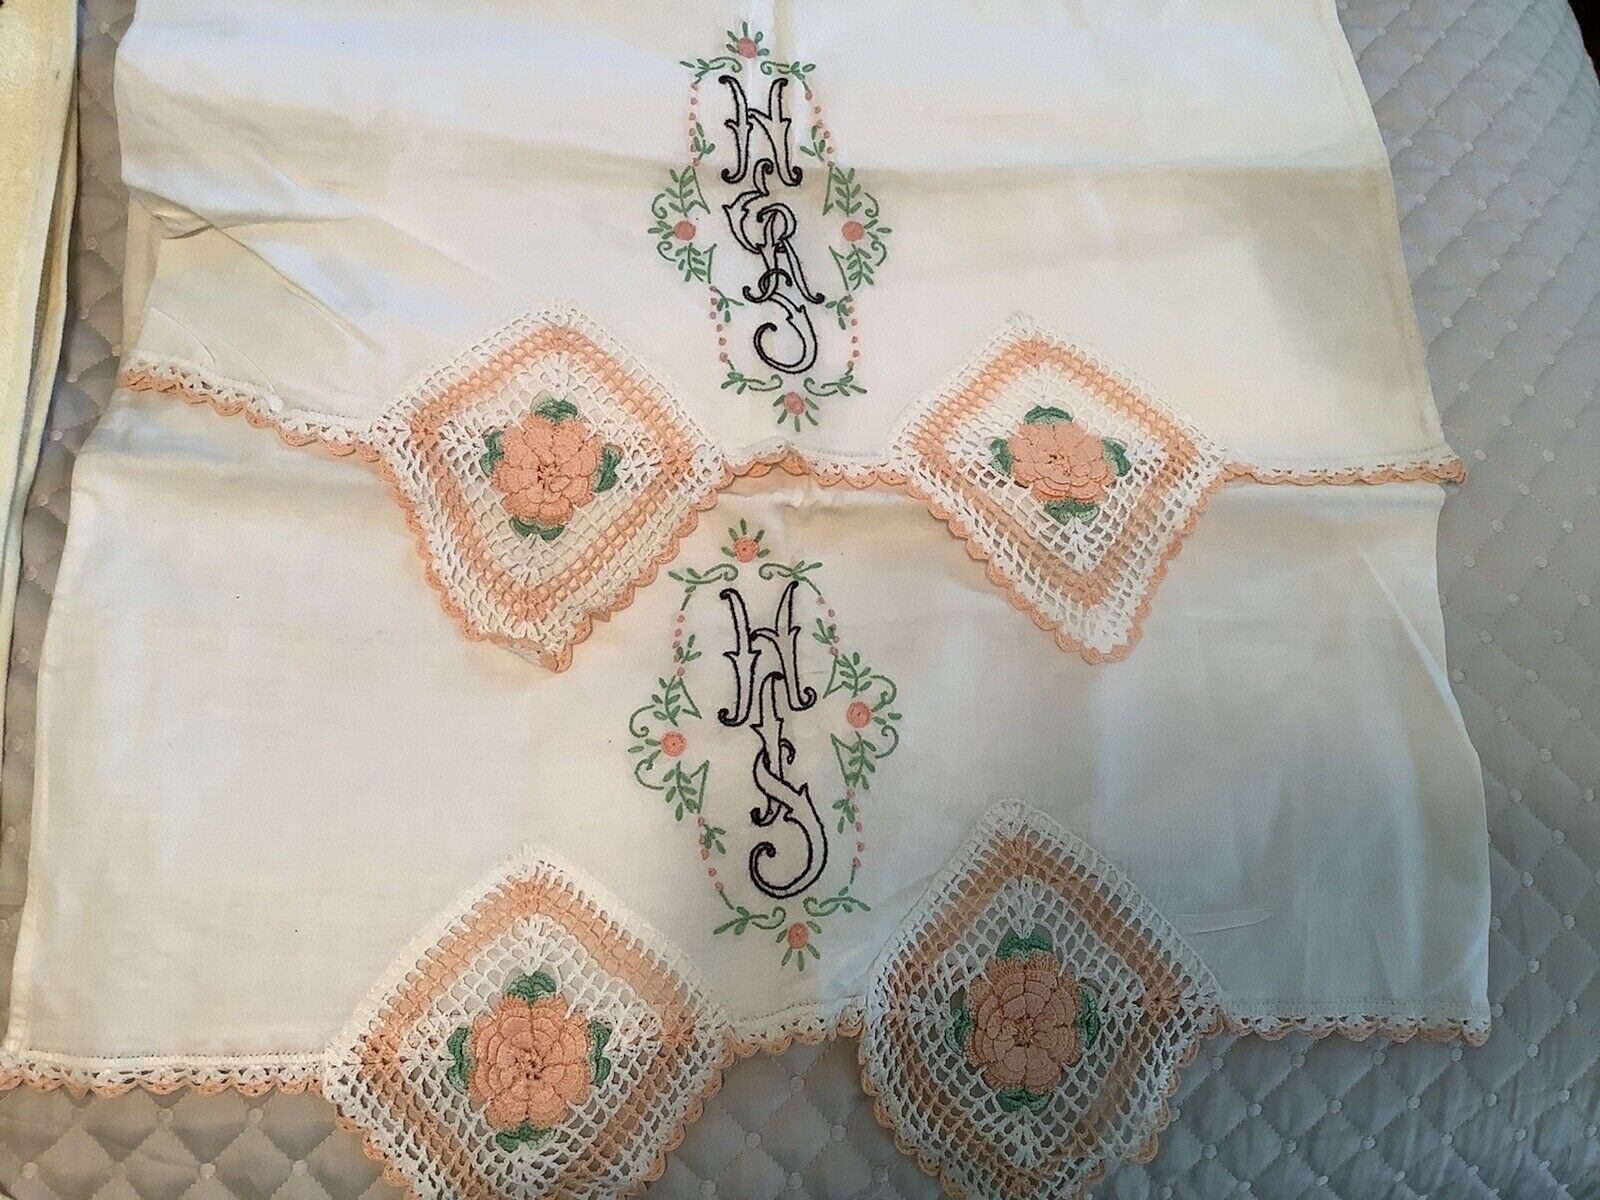 T101🌟GORGEOUS Vintage Handmade “His & Hers” Pillowcases Crochet Flowers Lace